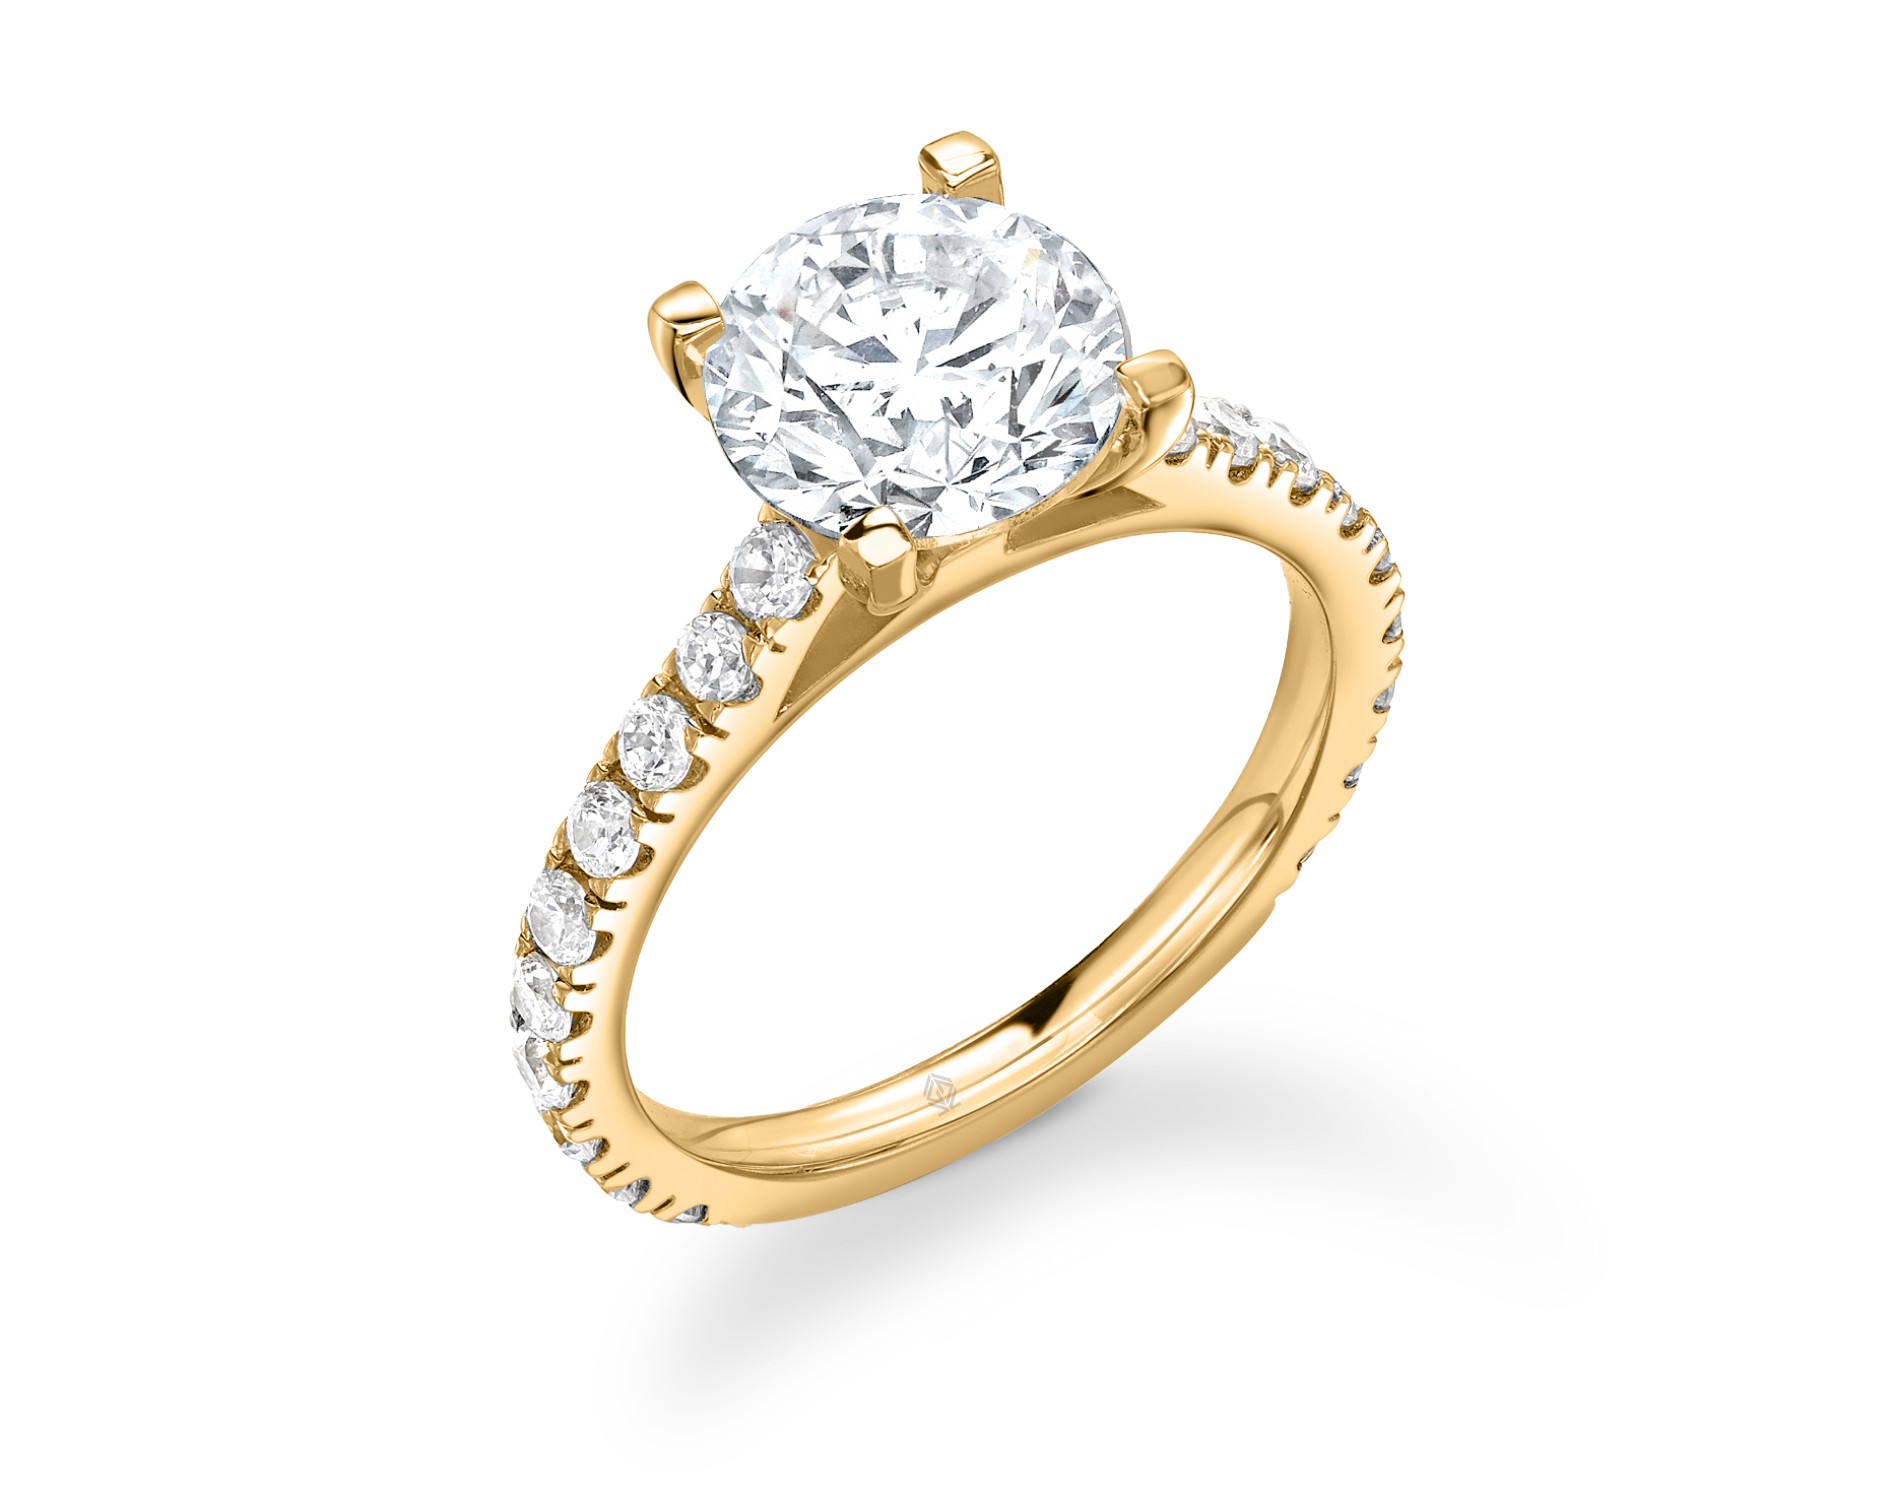 18K YELLOW GOLD 18K YELLOW GOLD ROUND CUT 4 PRONGS DIAMOND ENGAGEMENT RING WITH SIDE STONES PAVE SET